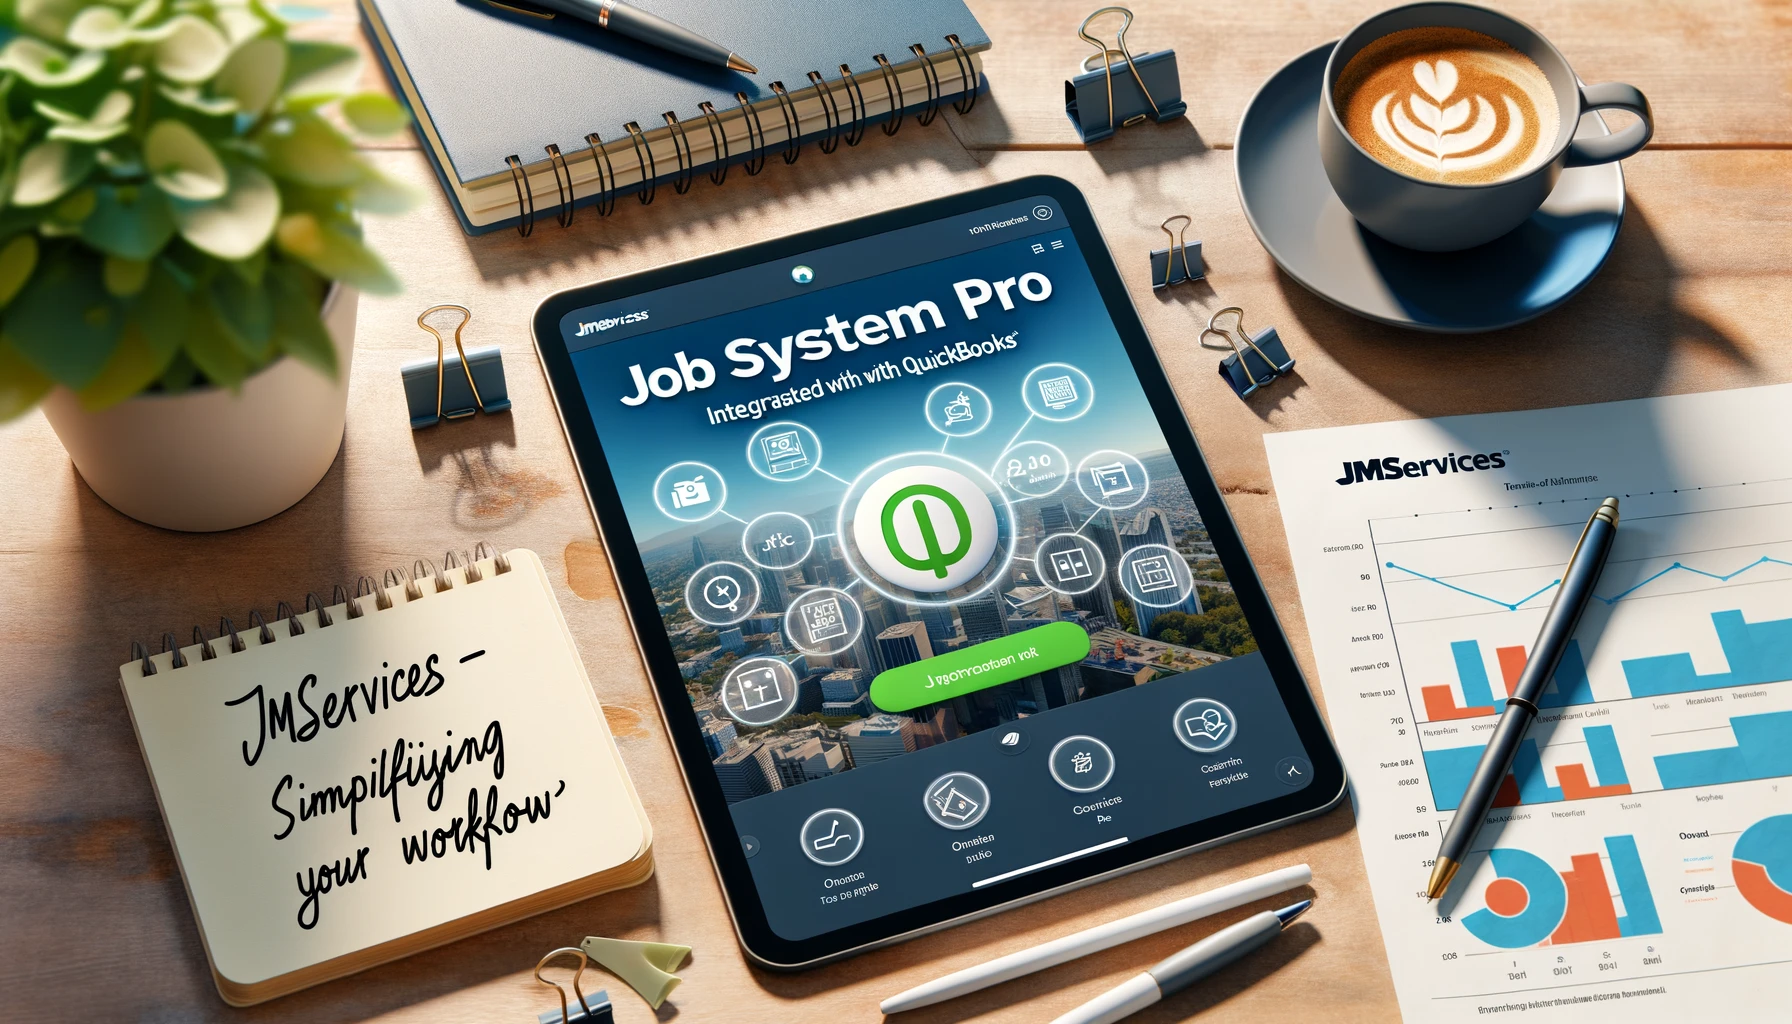 Syncing Invoices Has Never Been Easier: Introducing QuickBooks Integration for JMServices Job System Pro